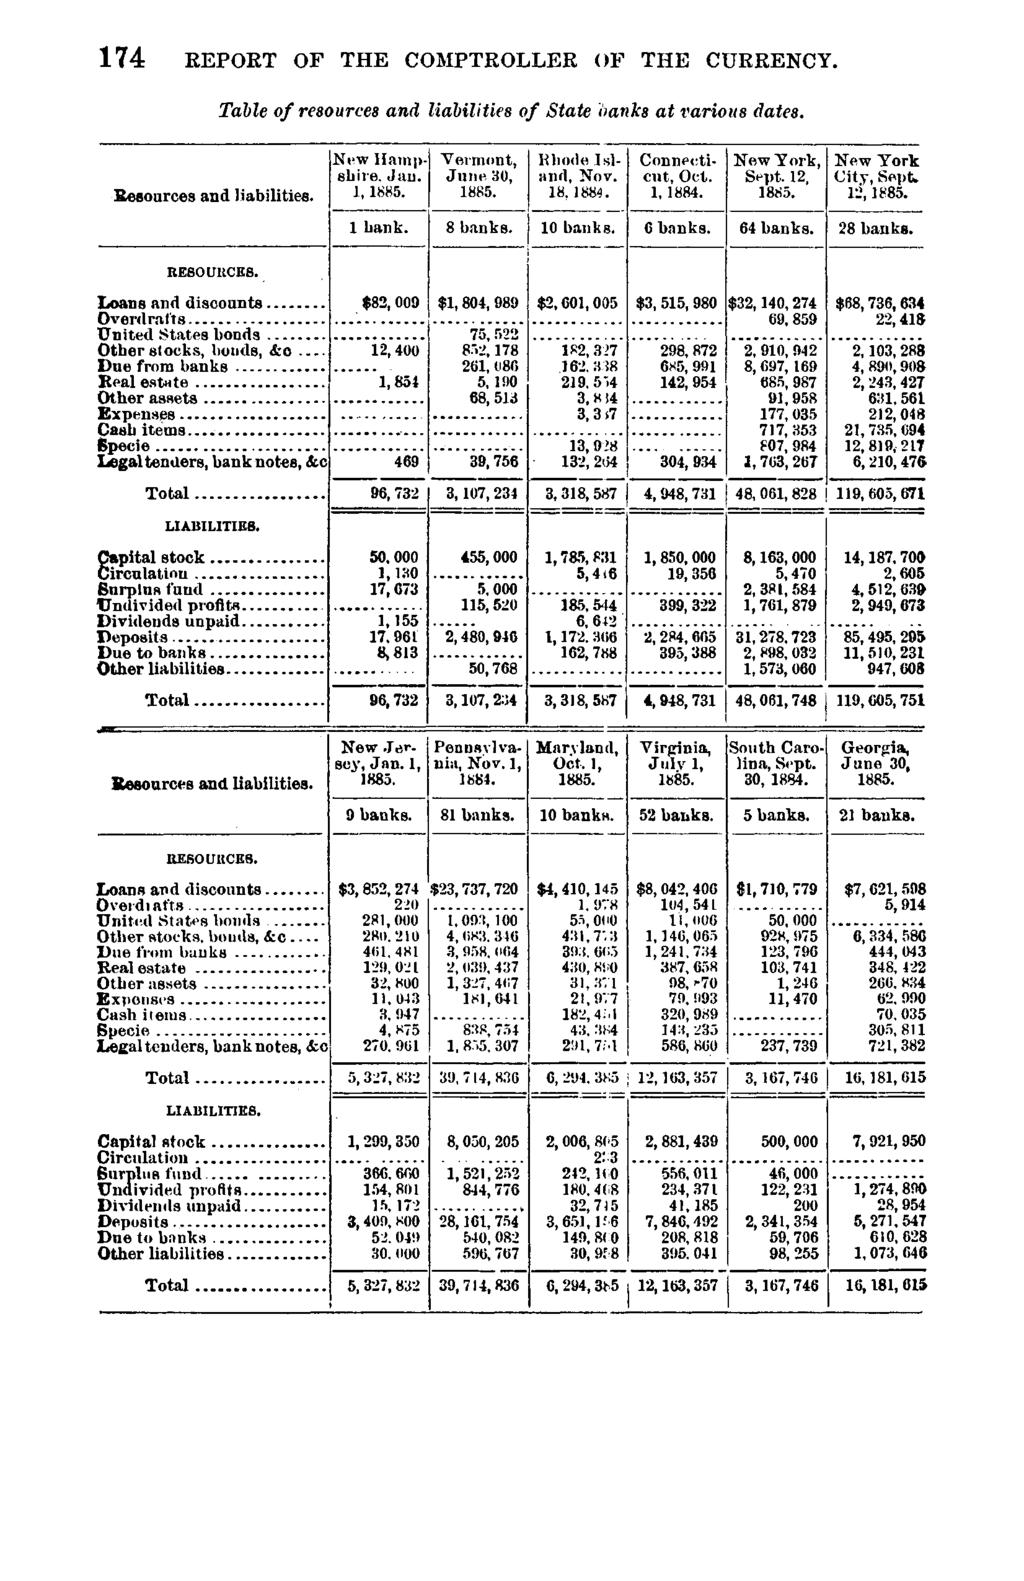 174 REPORT OF THE COMPTROLLER OF THE CURRENCY. Table of resources and liabilities of State banks at various dates. Resources and liabilities. New Hampshire. Jan. 1,1885. Vermont, June 30, 1885.